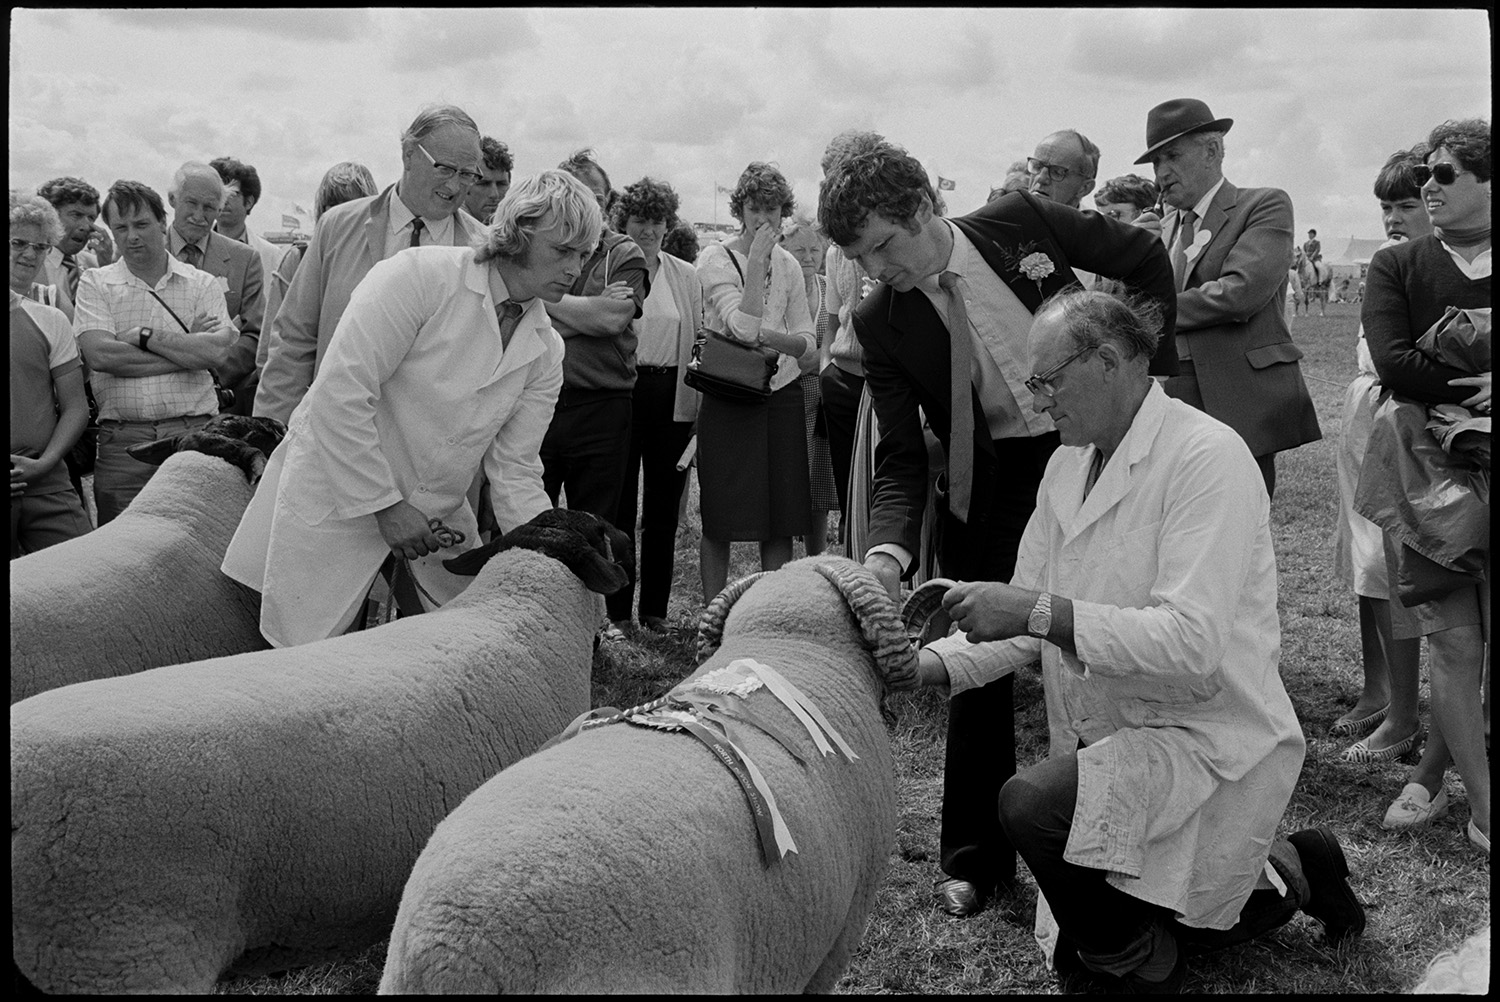 North Devon Show, Prize cattle, sheep, exhibitions etc.
[Judges and farmers inspecting rams at the North Devon Show near Alverdiscott, watched by visitors to the Show.]